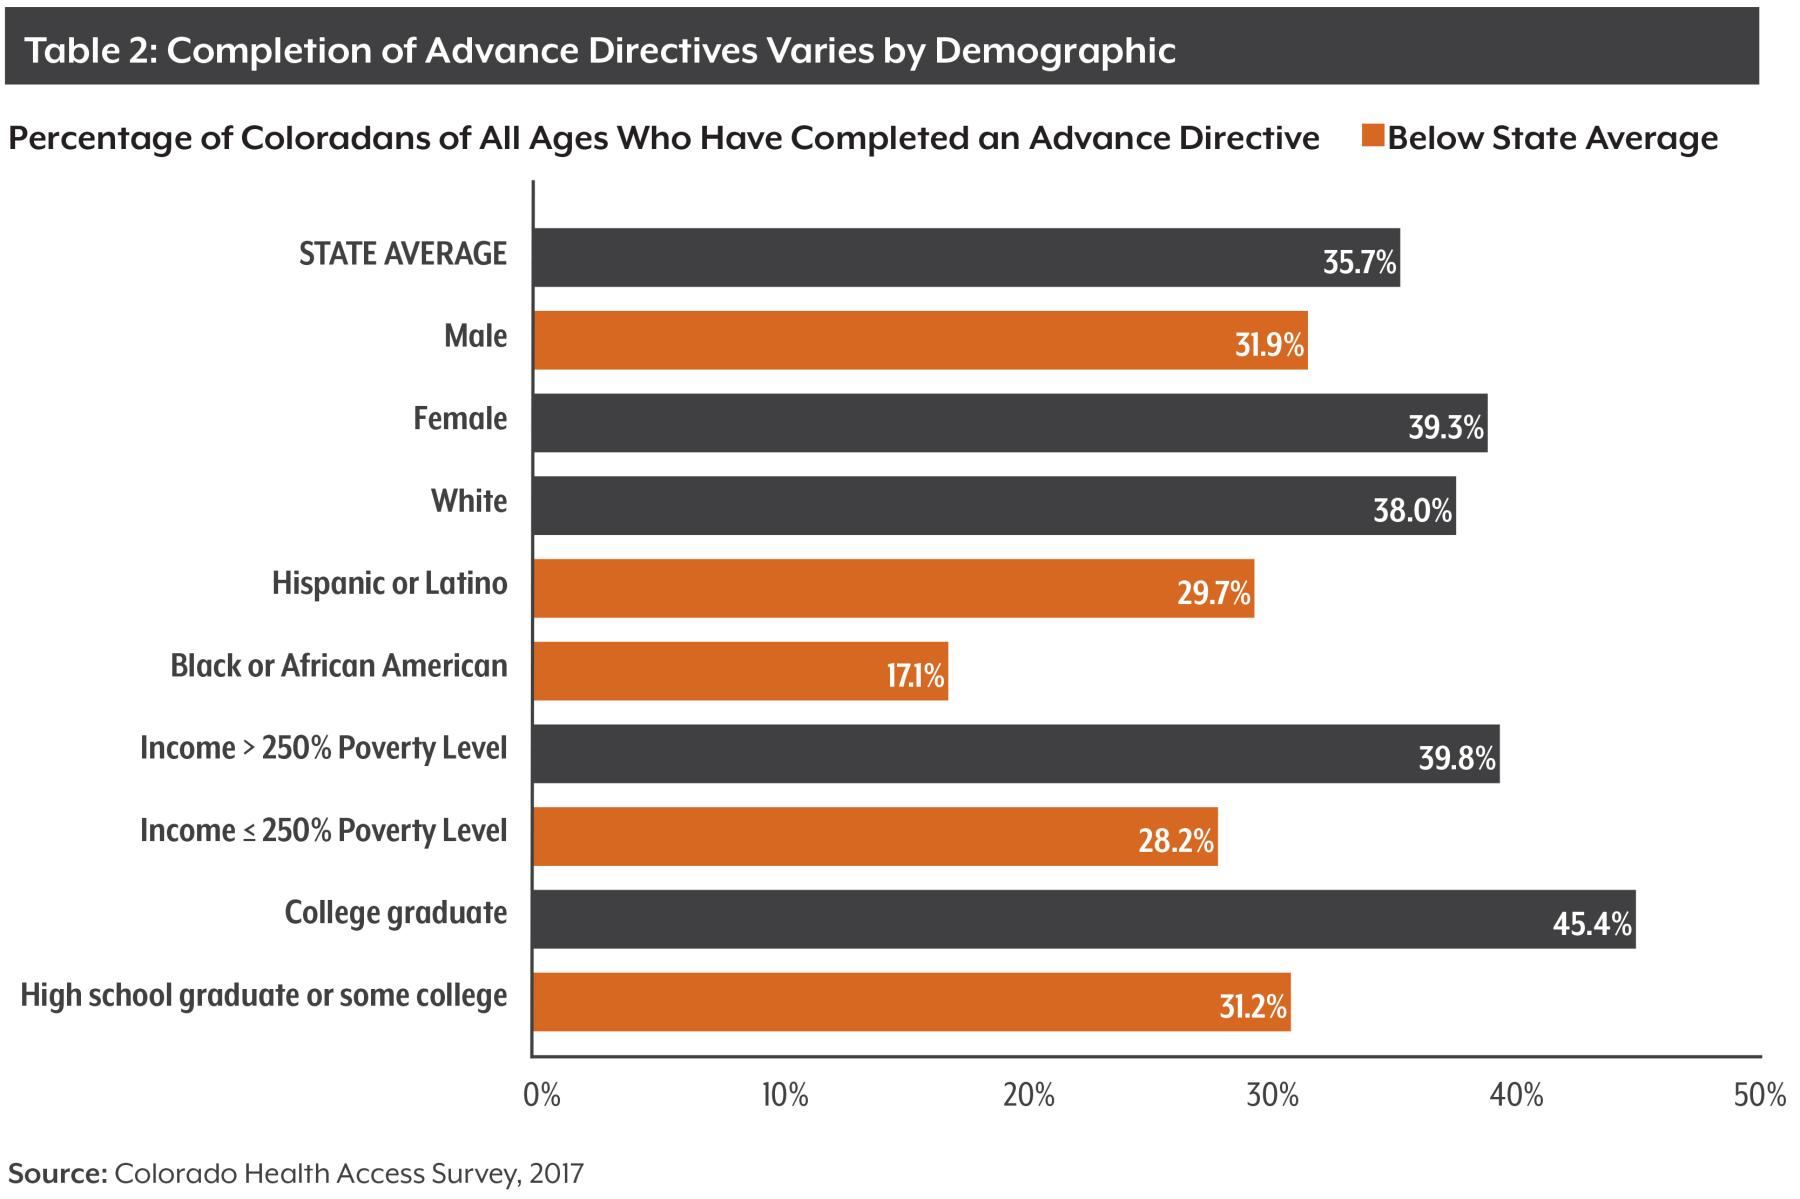 Completion of Advance Directives Varies by Demographic